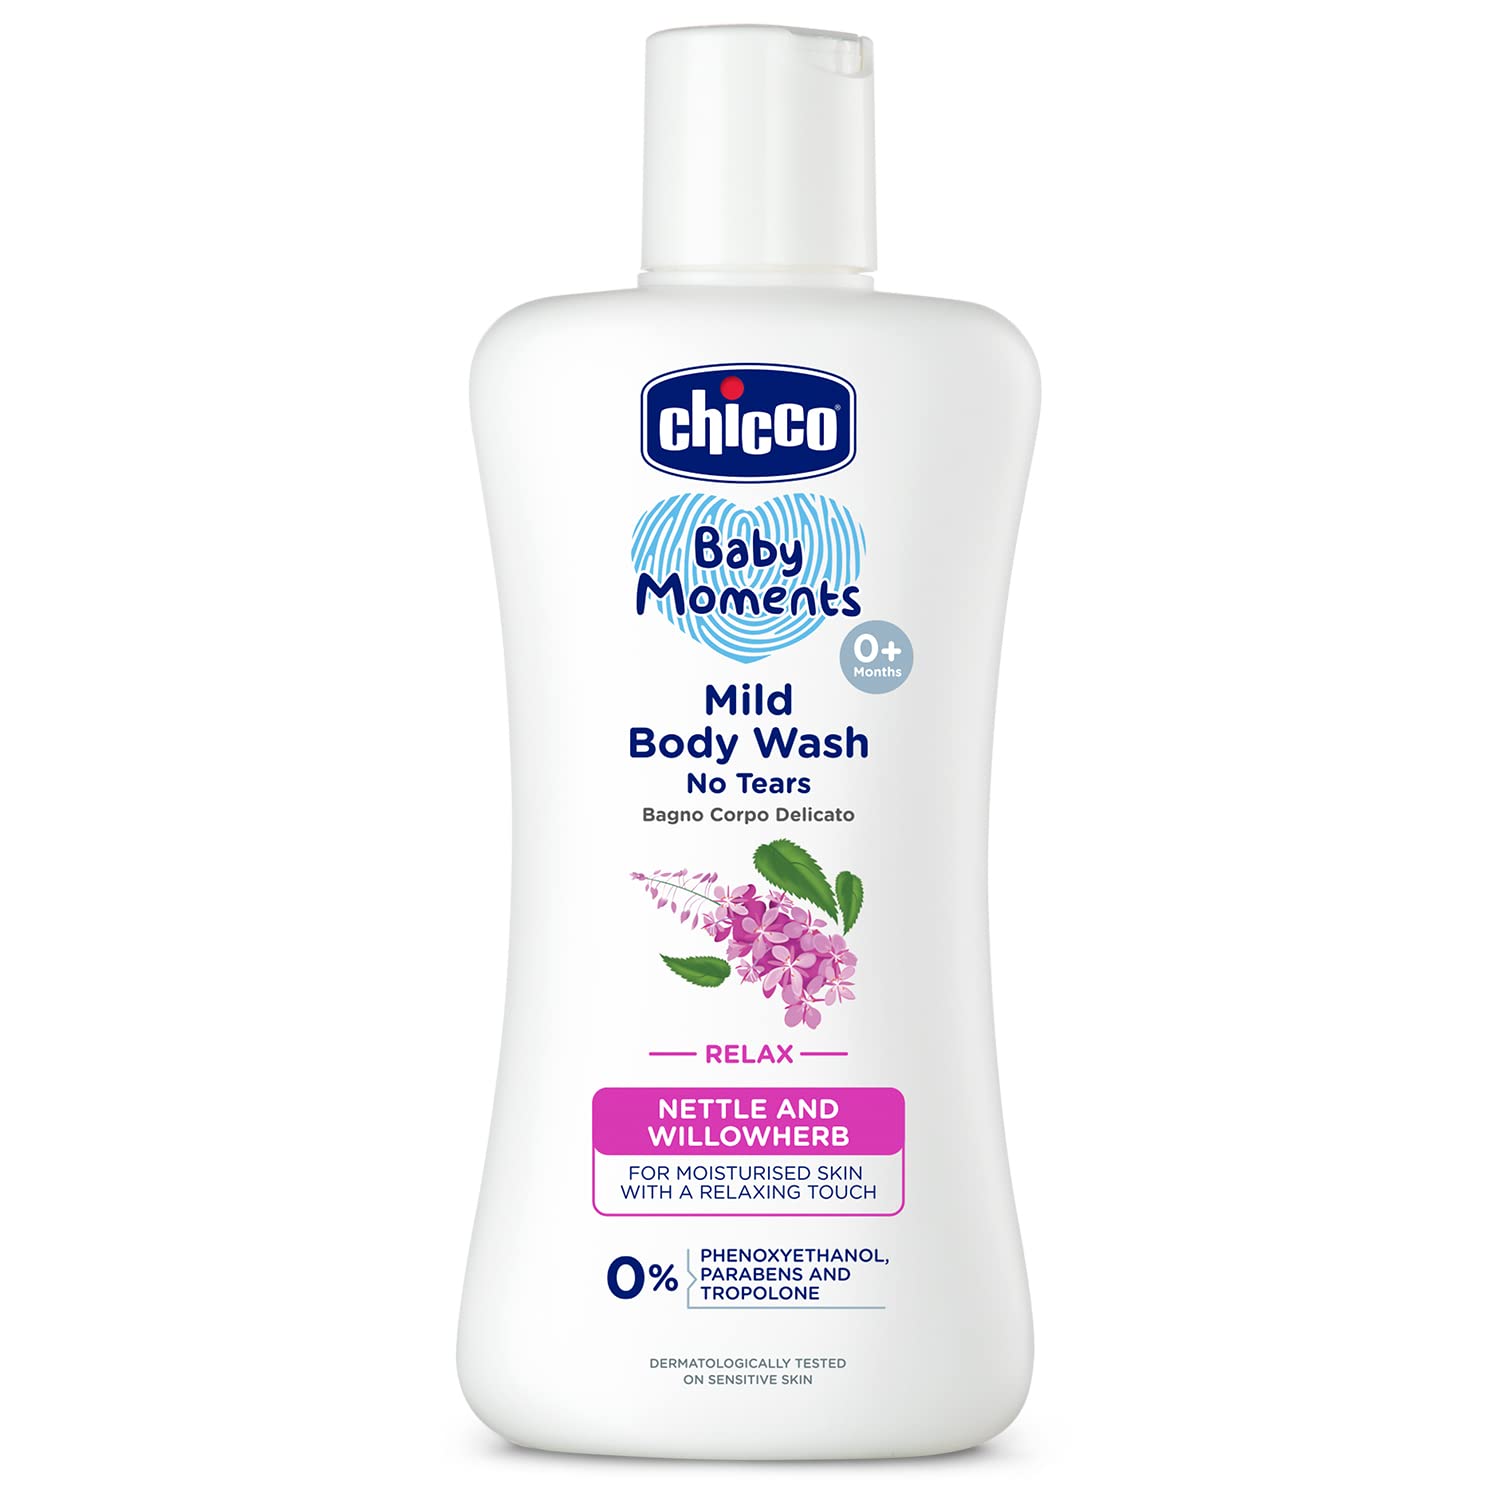 Chicco Baby Moments Mild Body Wash Relax, New Advanced Formula with Natural Ingredients, No Tears & Soap-Free, Mild formula for Baby’s Body & Face Wash